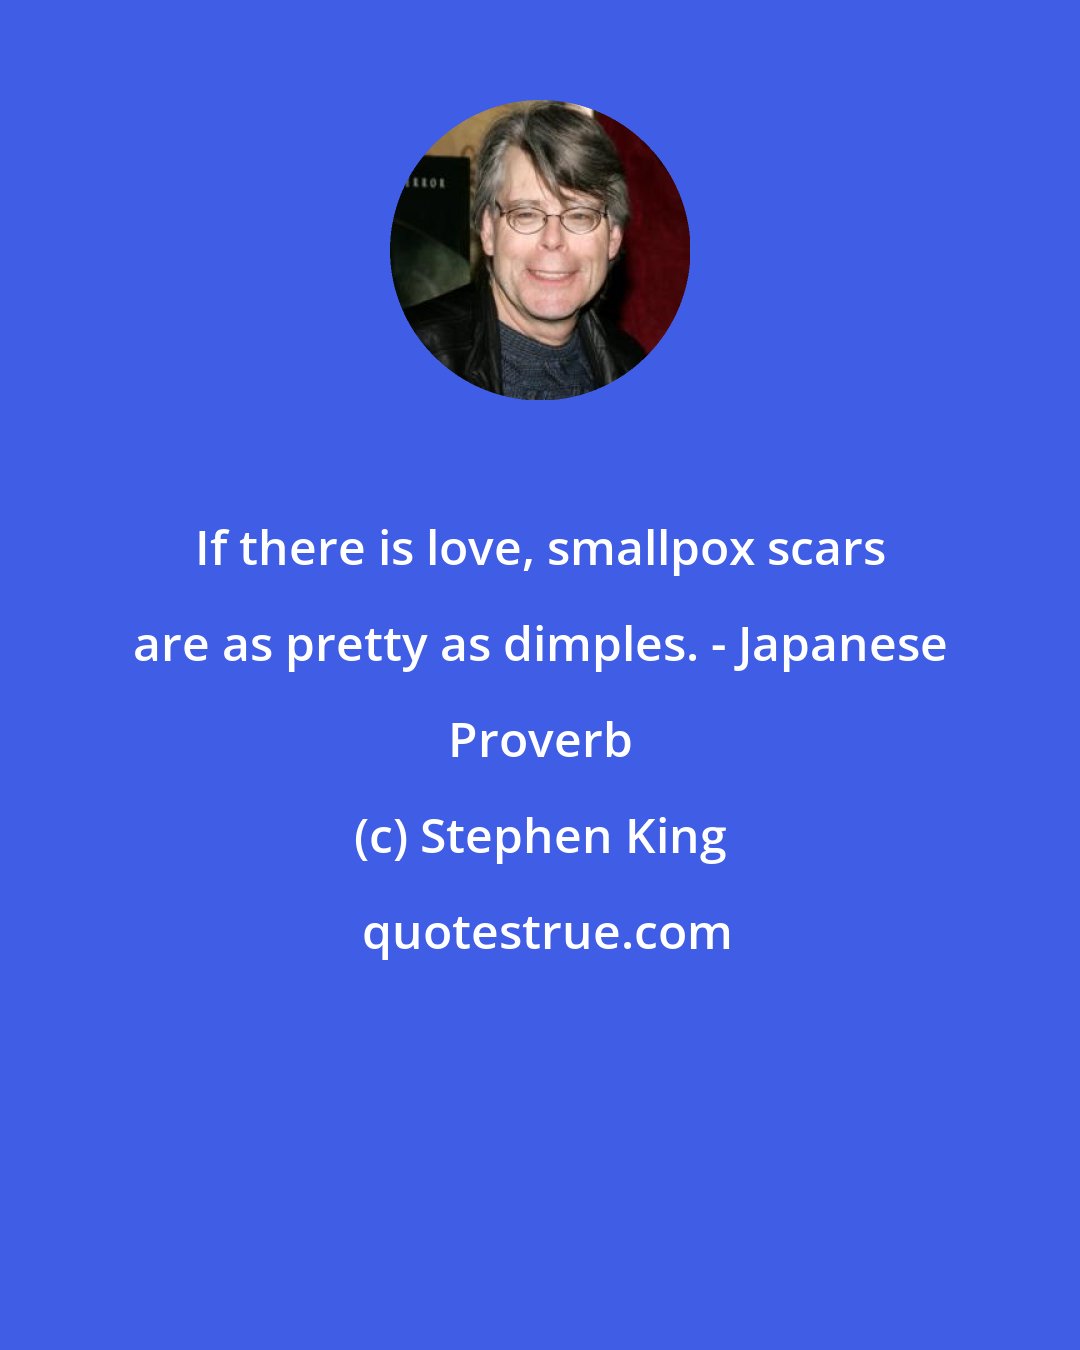 Stephen King: If there is love, smallpox scars are as pretty as dimples. - Japanese Proverb